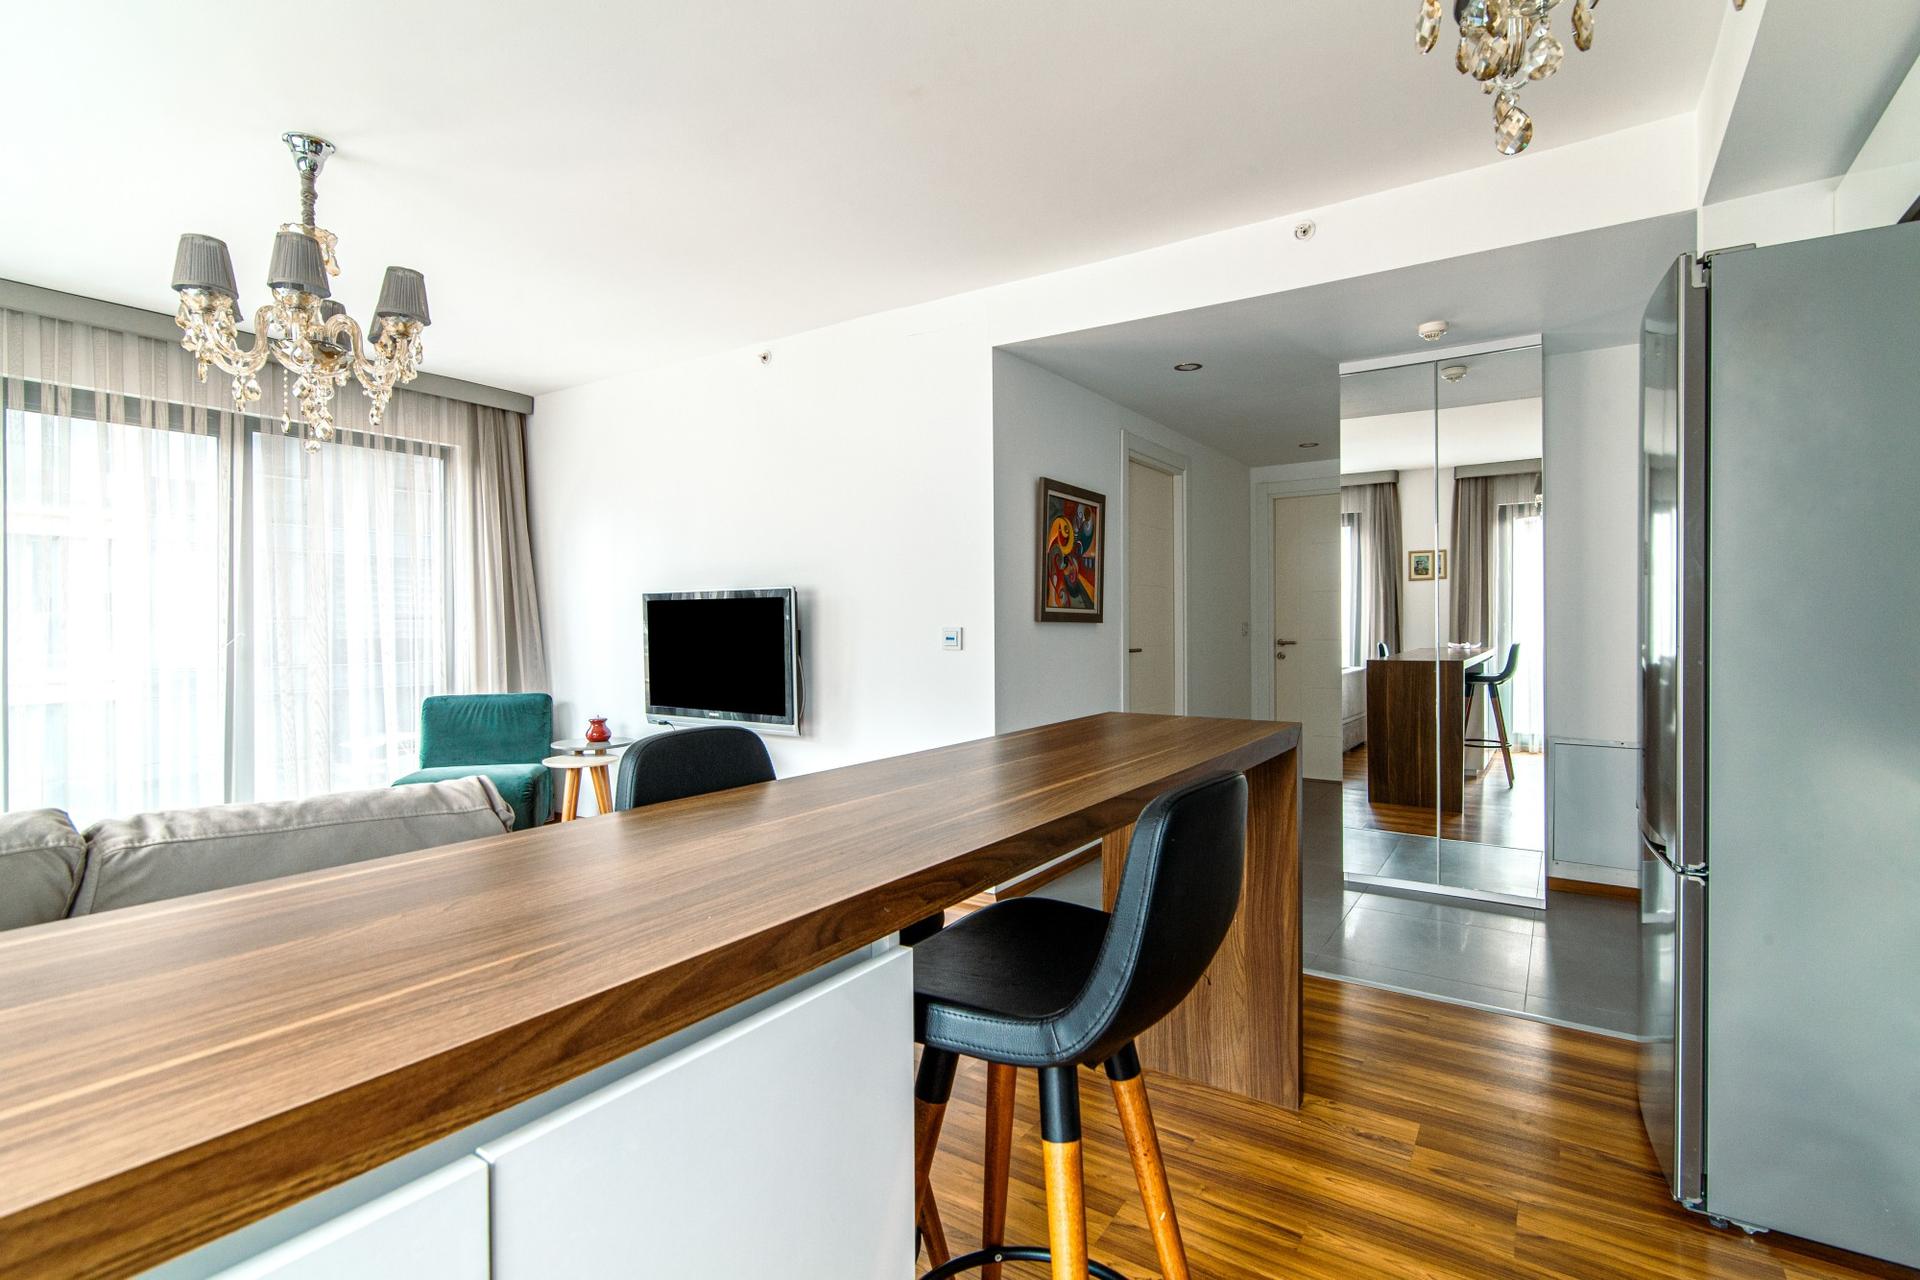 Our modern flat is ready to host you during your Istanbul stay.